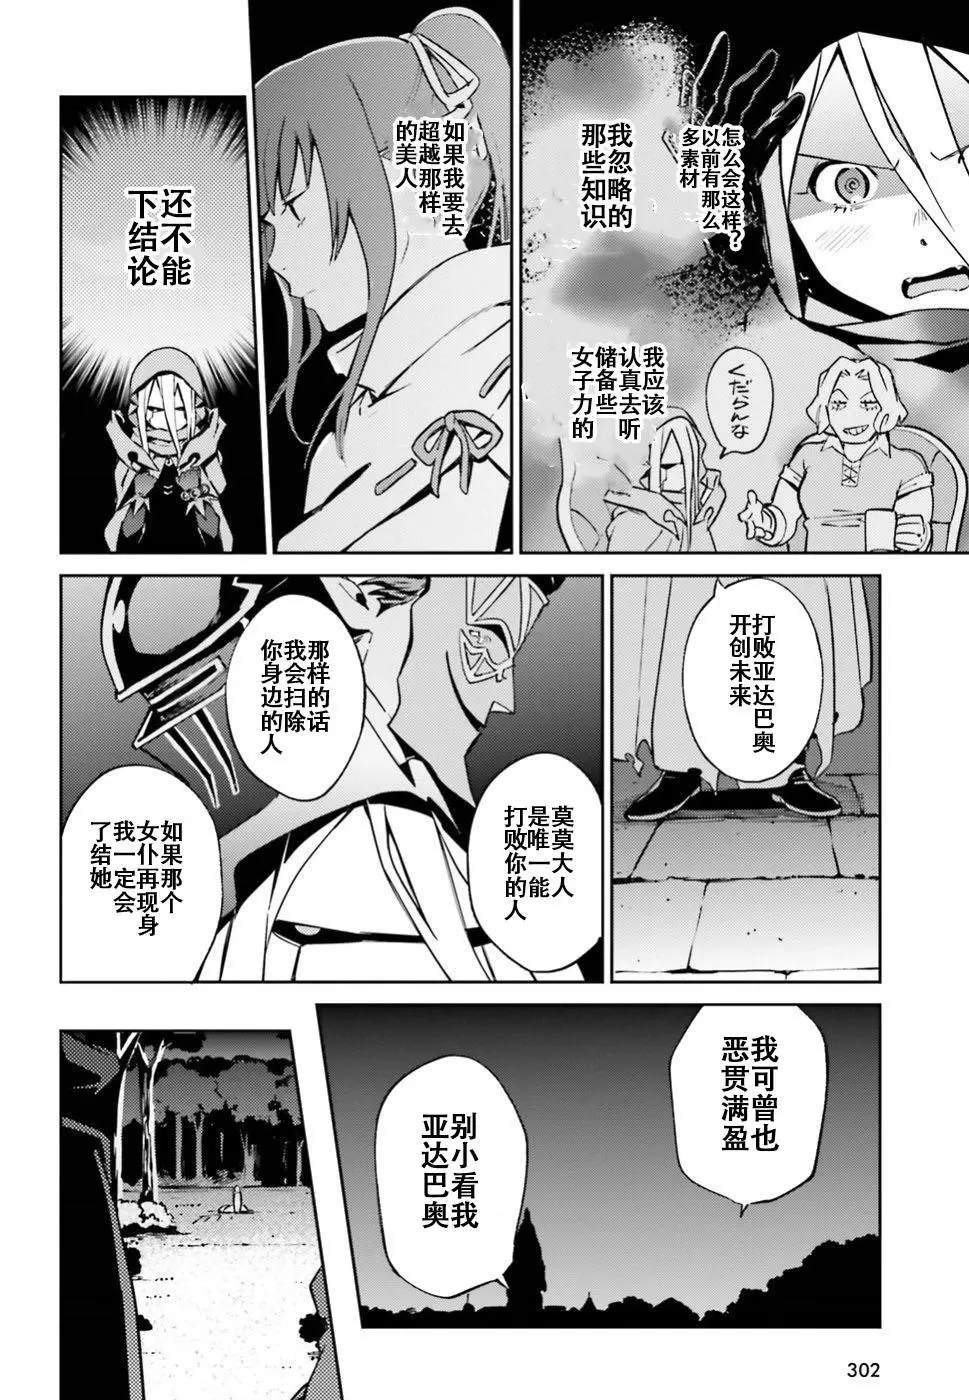 OVERLORD - 第47話 - 4